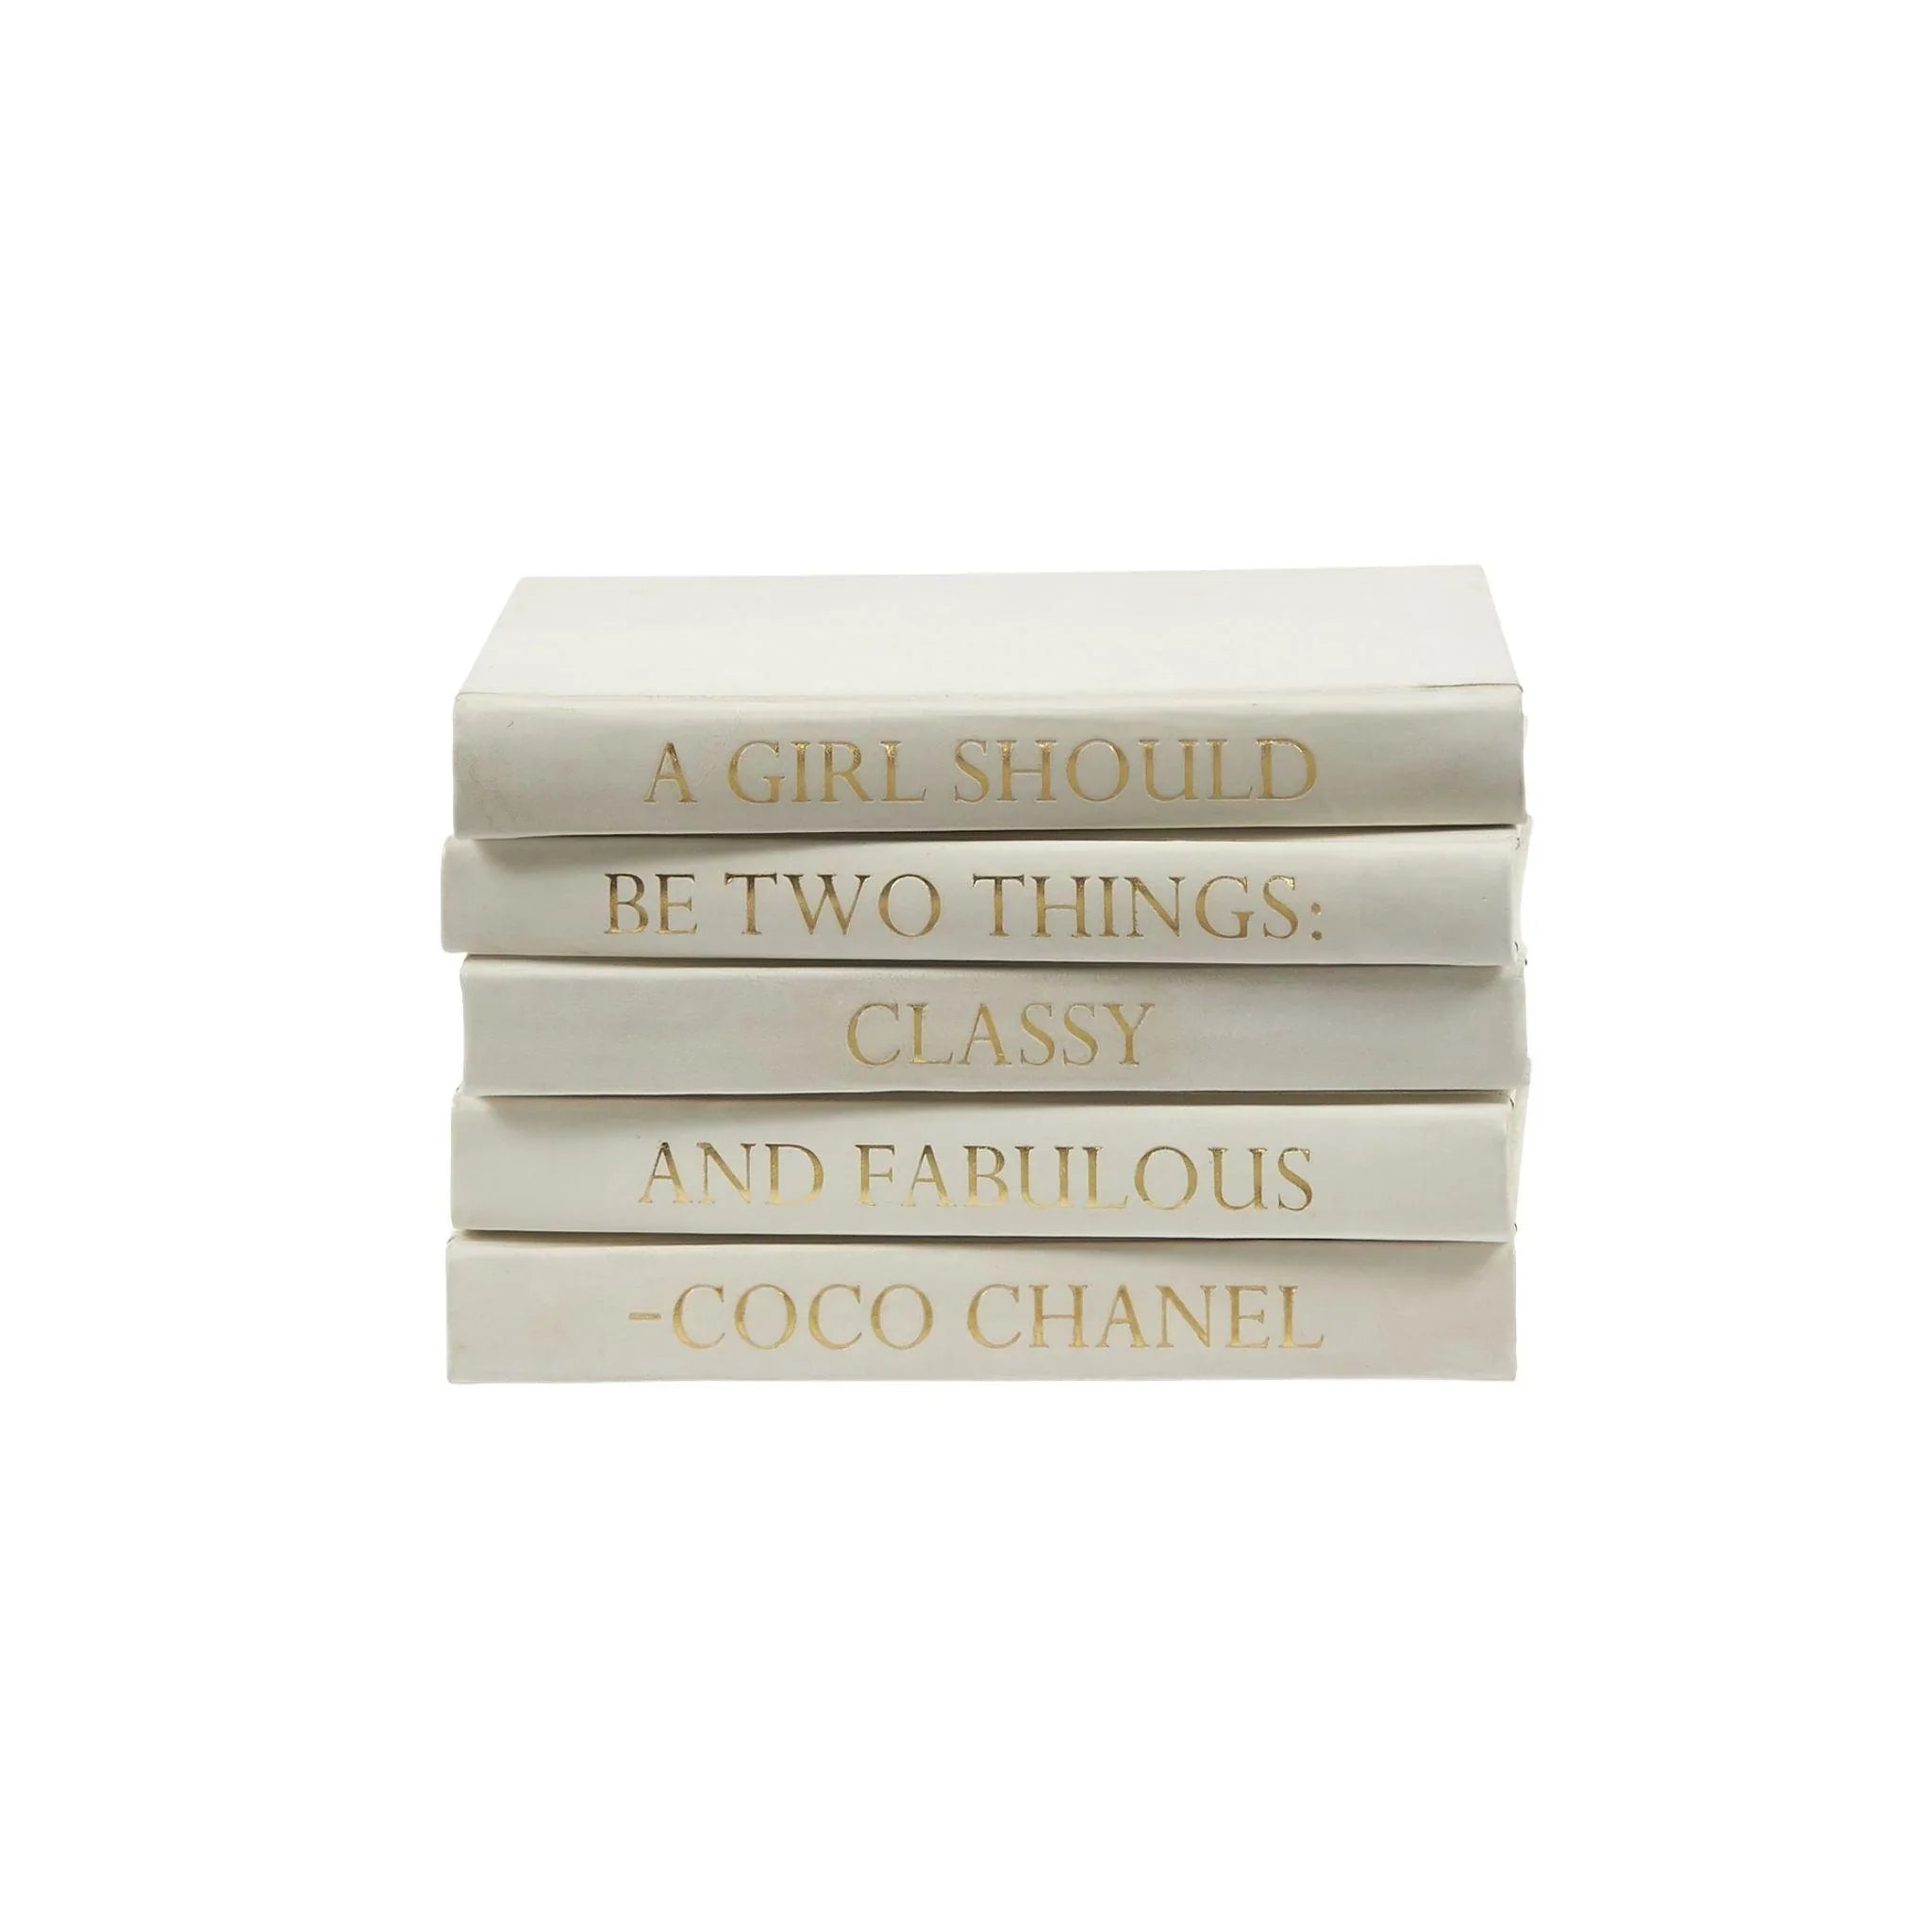 Chanel Quote Series - set of 5 books “…Always Be Different – Sugarboo & Co